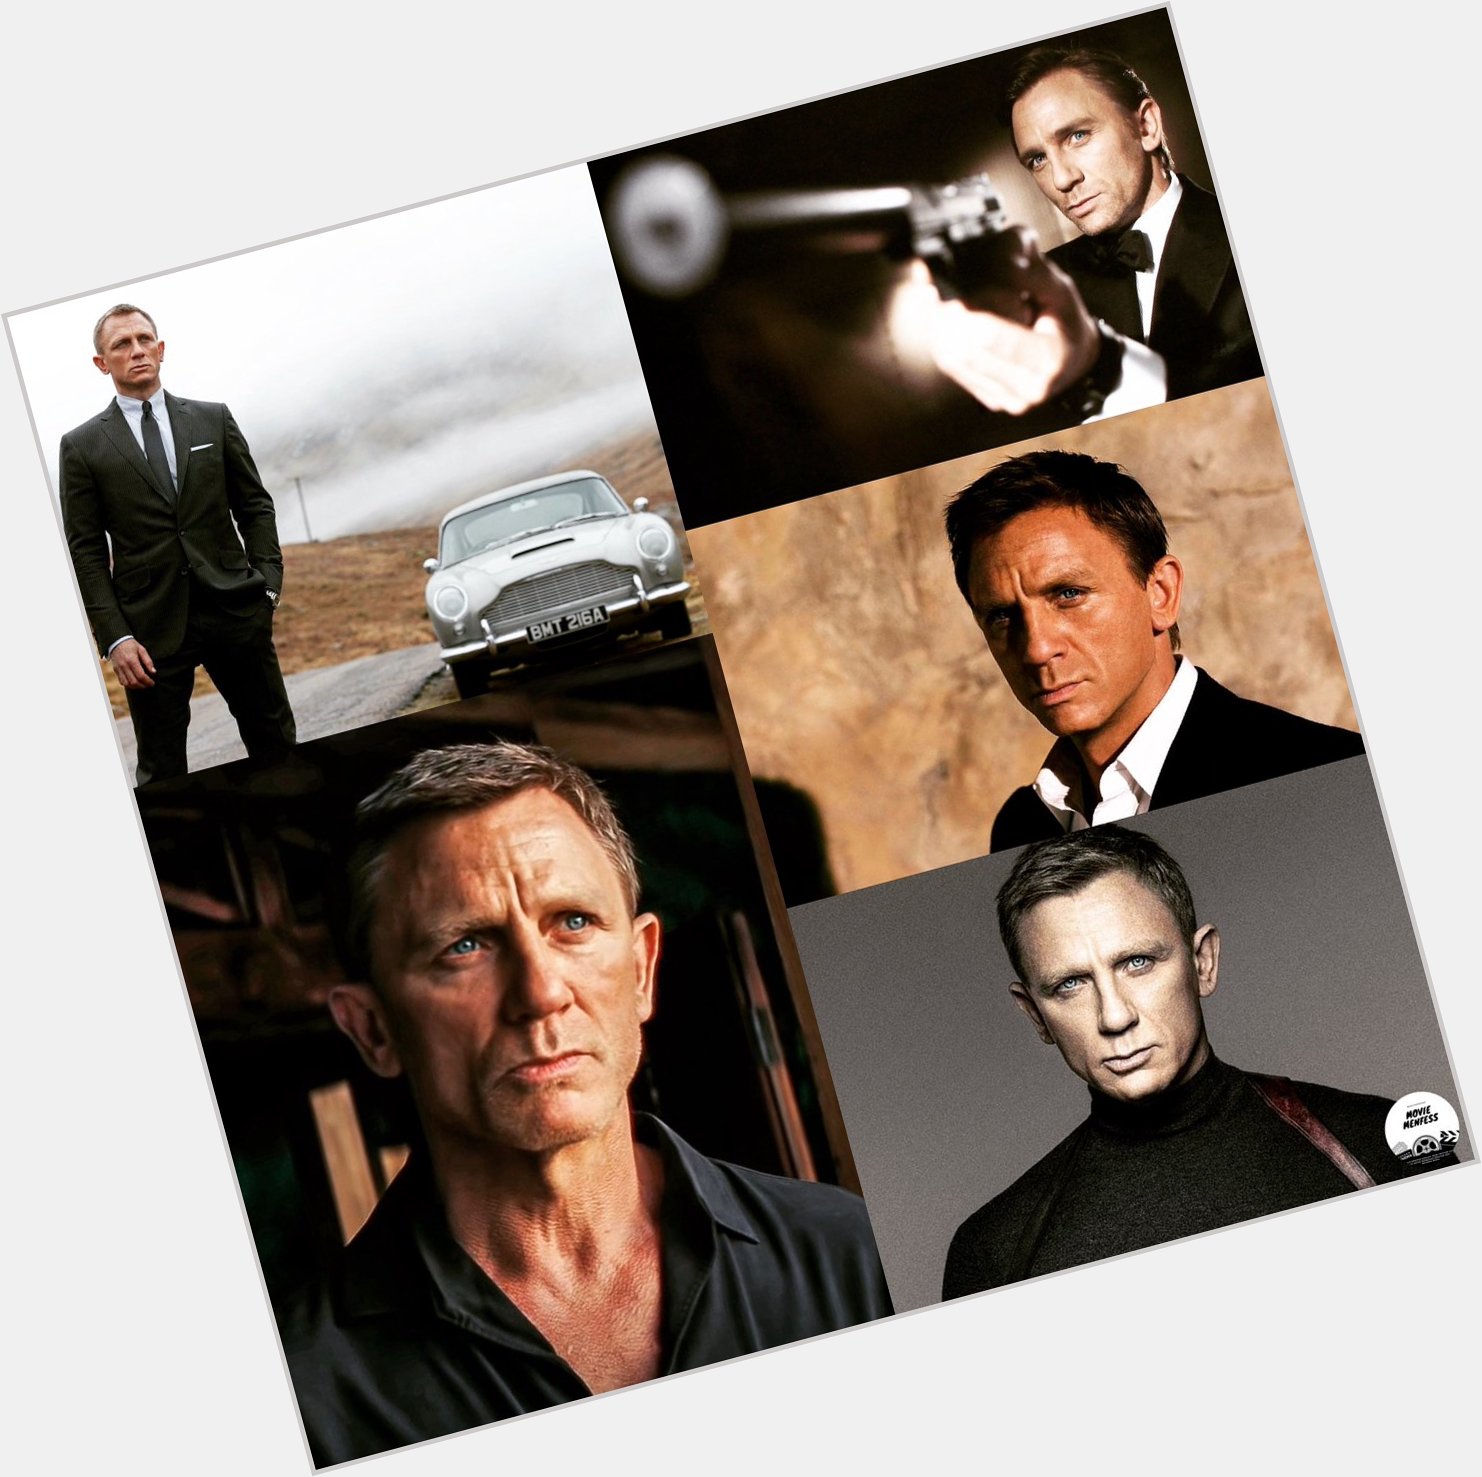 Happy Birthday Daniel Craig!! What is your favorite film from him? mvs 